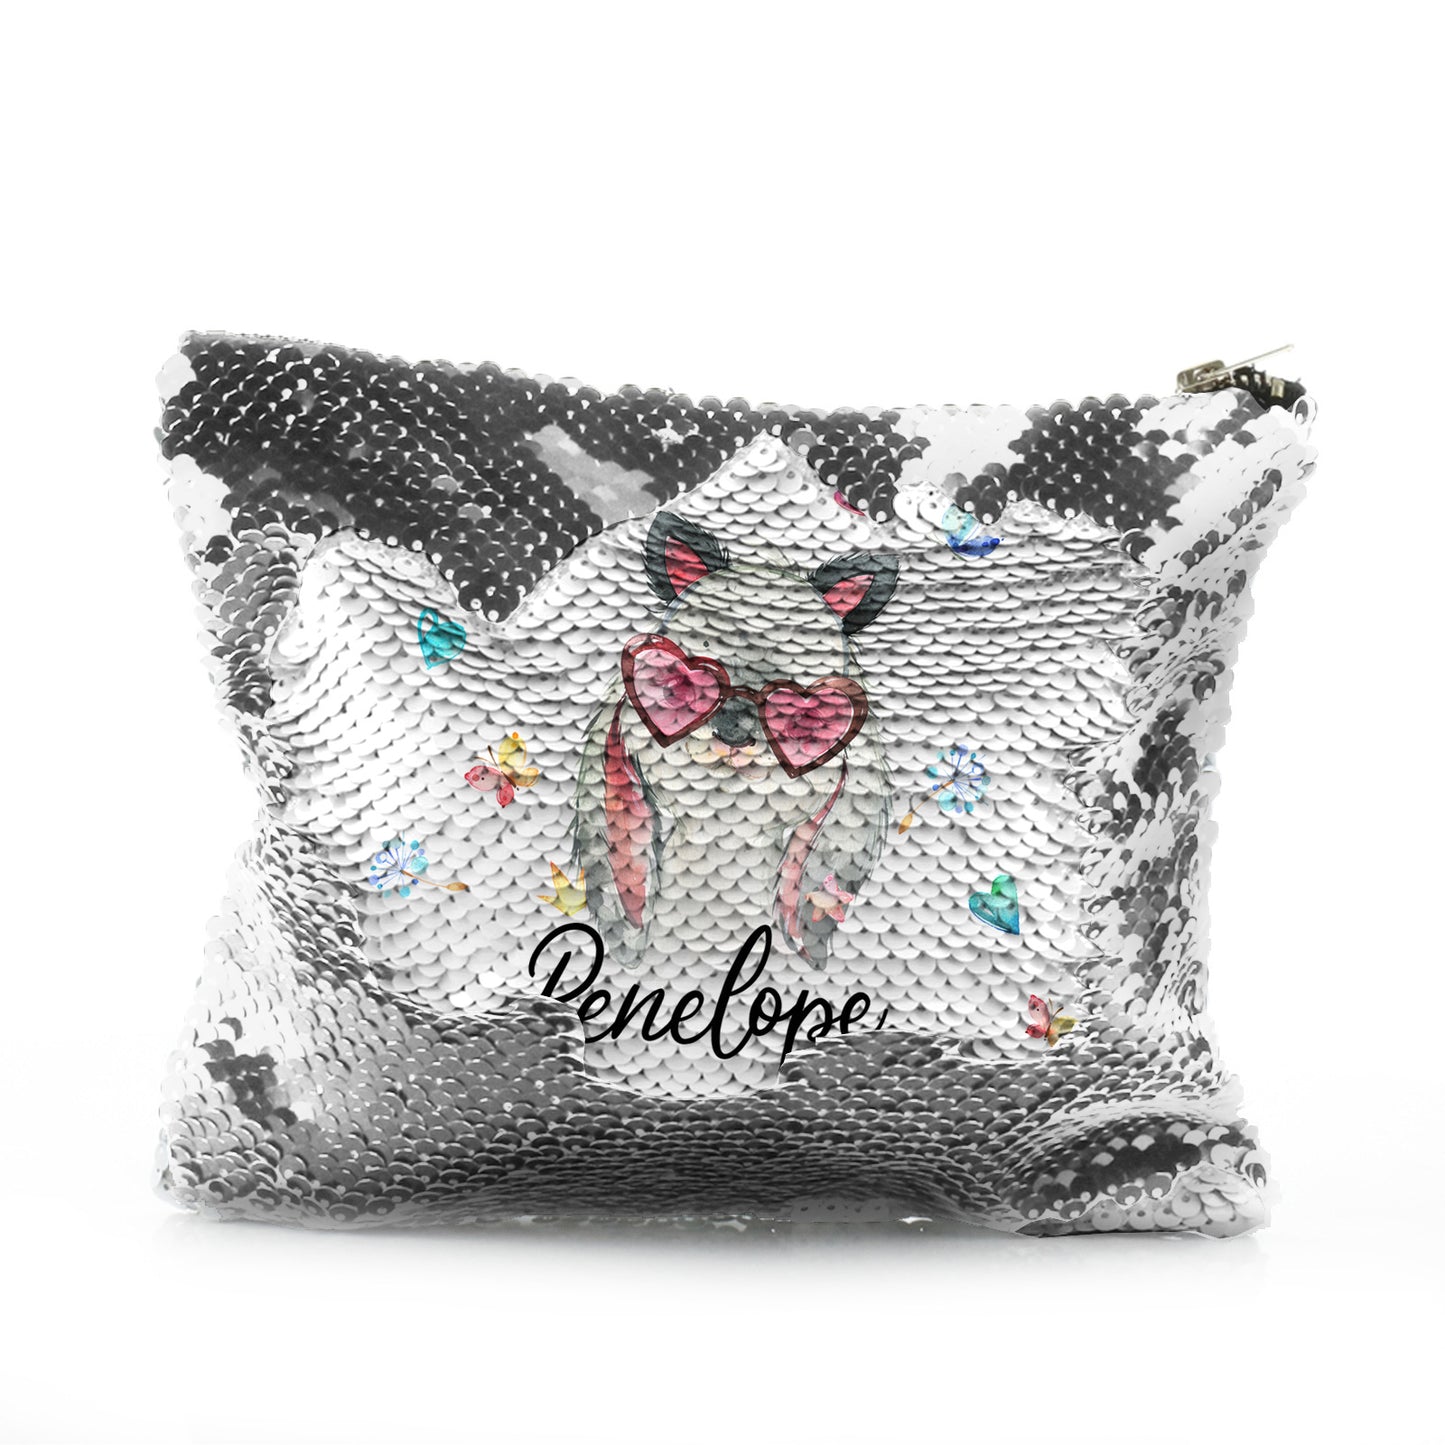 Personalised Sequin Zip Bag with Grey Rabbit with Cat ears and Pink Heart Glasses and Cute Text